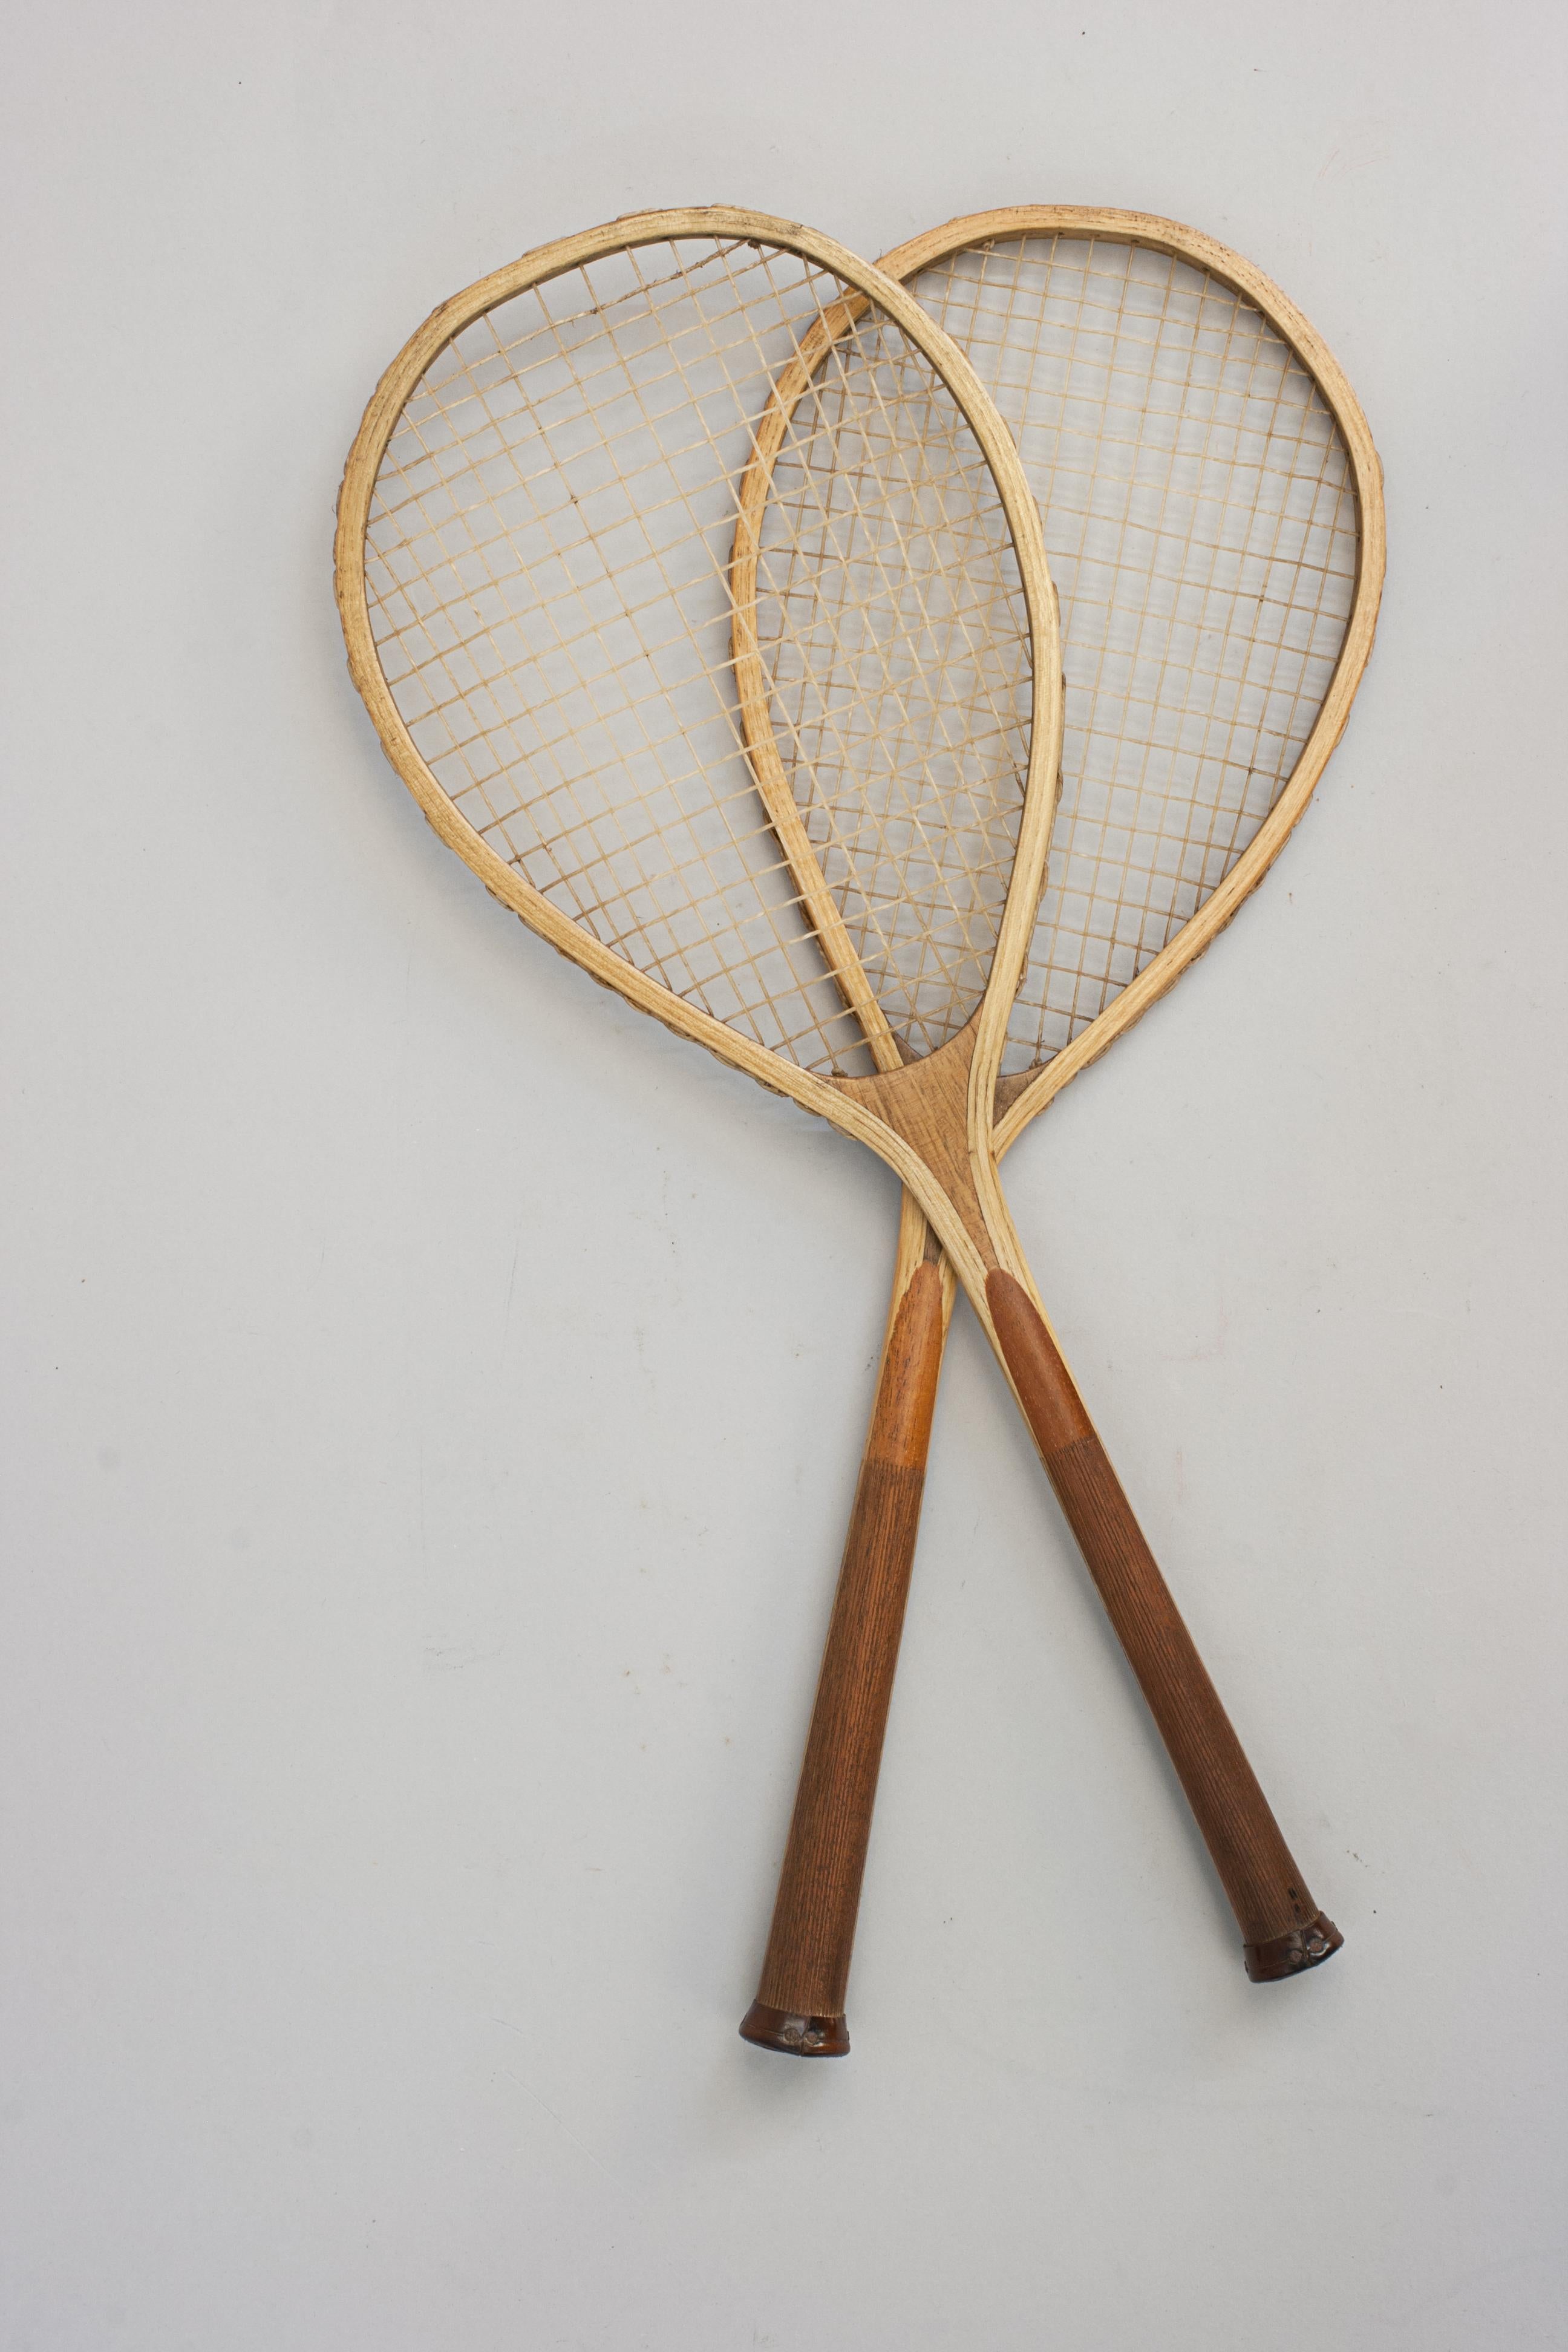 Vintage, Strung Table Tennis Rackets For Sale 4